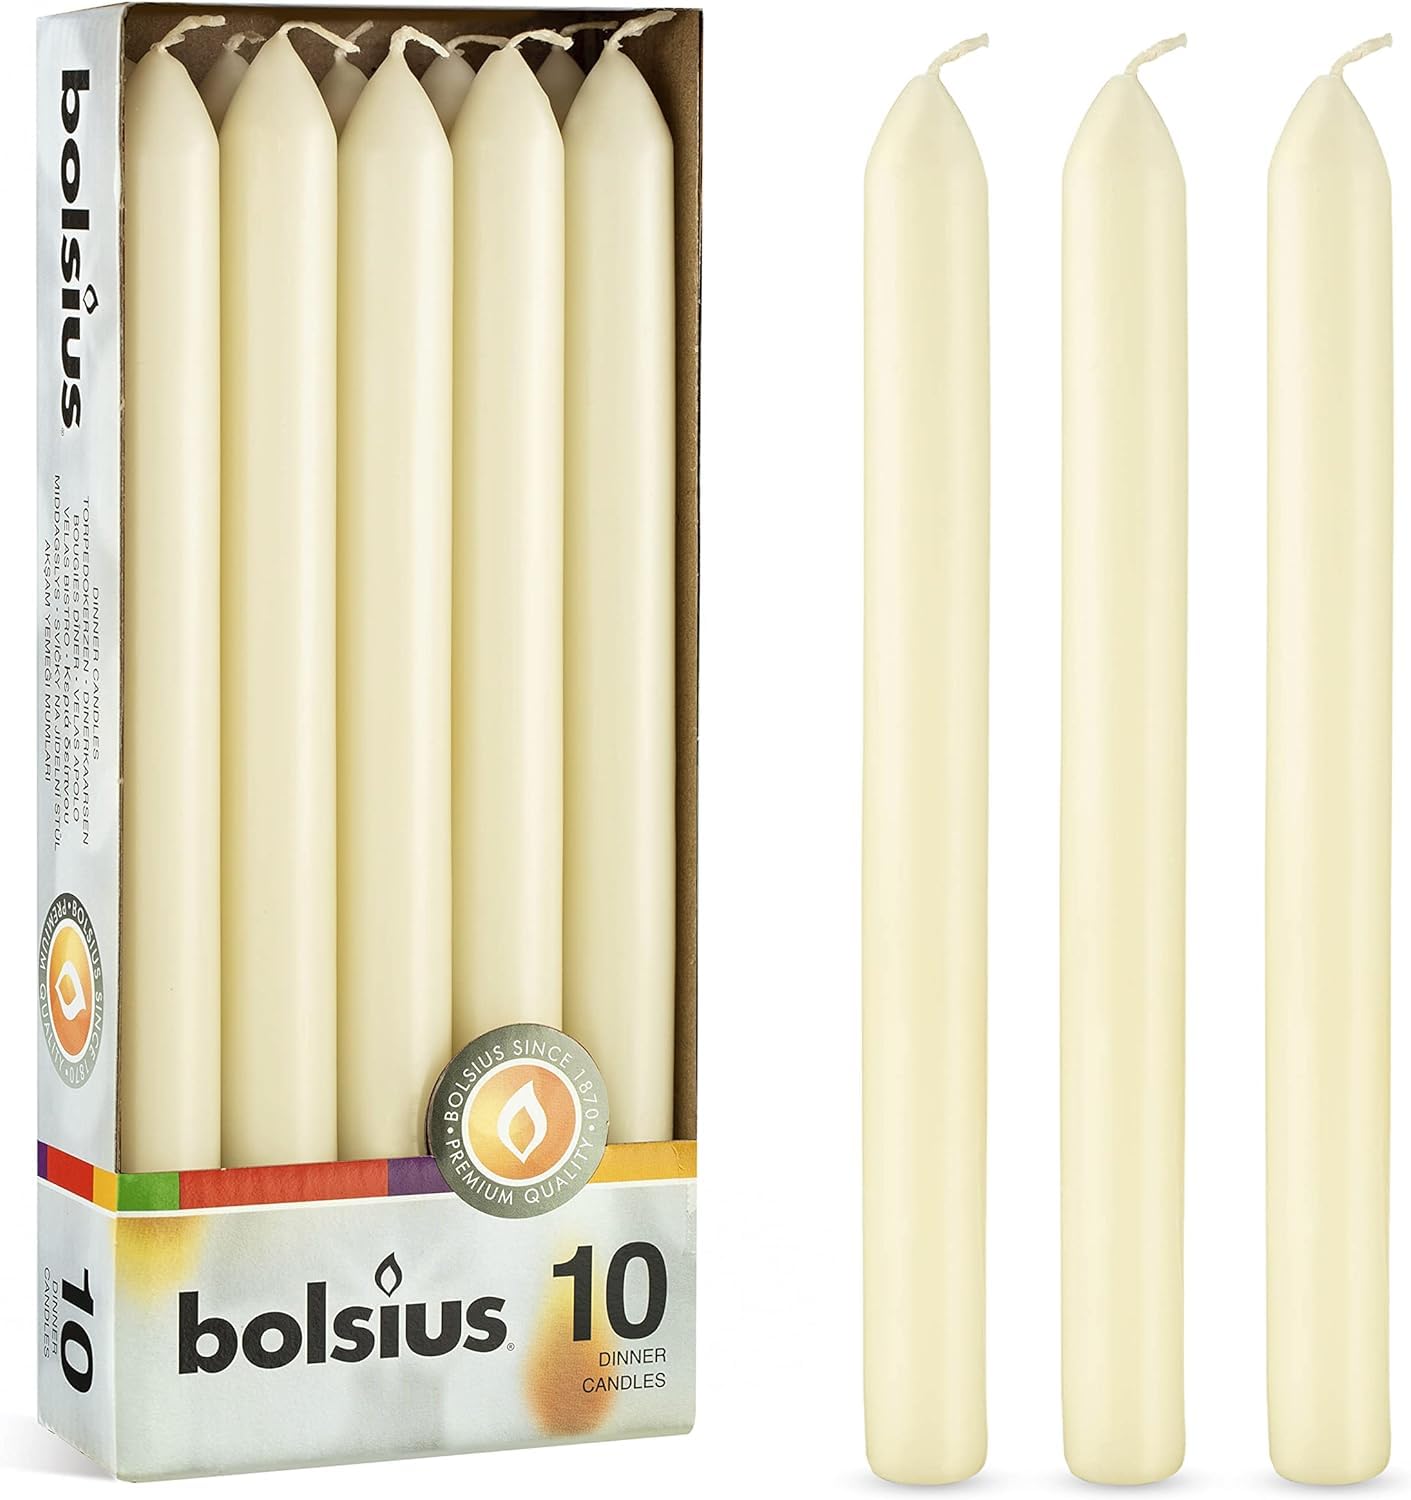 BOLSIUS Ivory Dinner Candles - 10 Pack Unscented 9 Inch Straight Taper Candle Set - 8 Hour Burn Time - Premium European Quality - Smokeless And Dripless Household, Spa, Wedding, And Party Candlestick  - Good